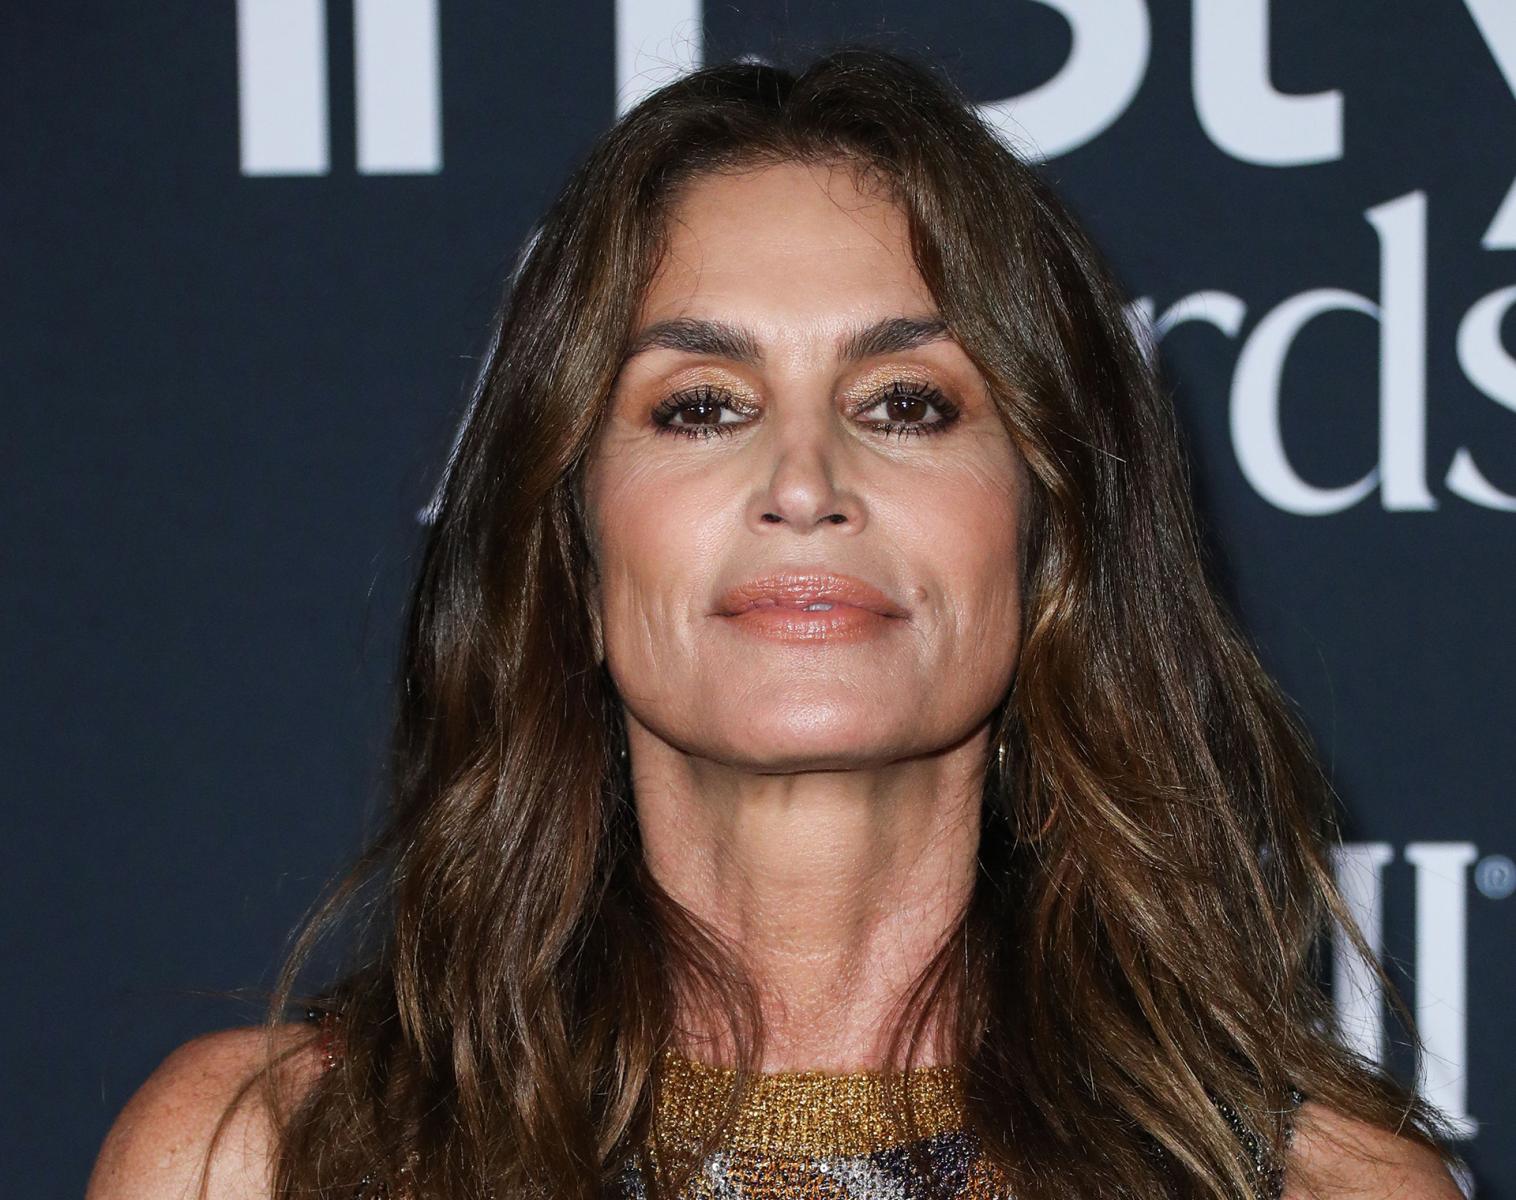 Breaking Stereotypes: These 5 Supermodels over 50 are Still Killing it - image 3